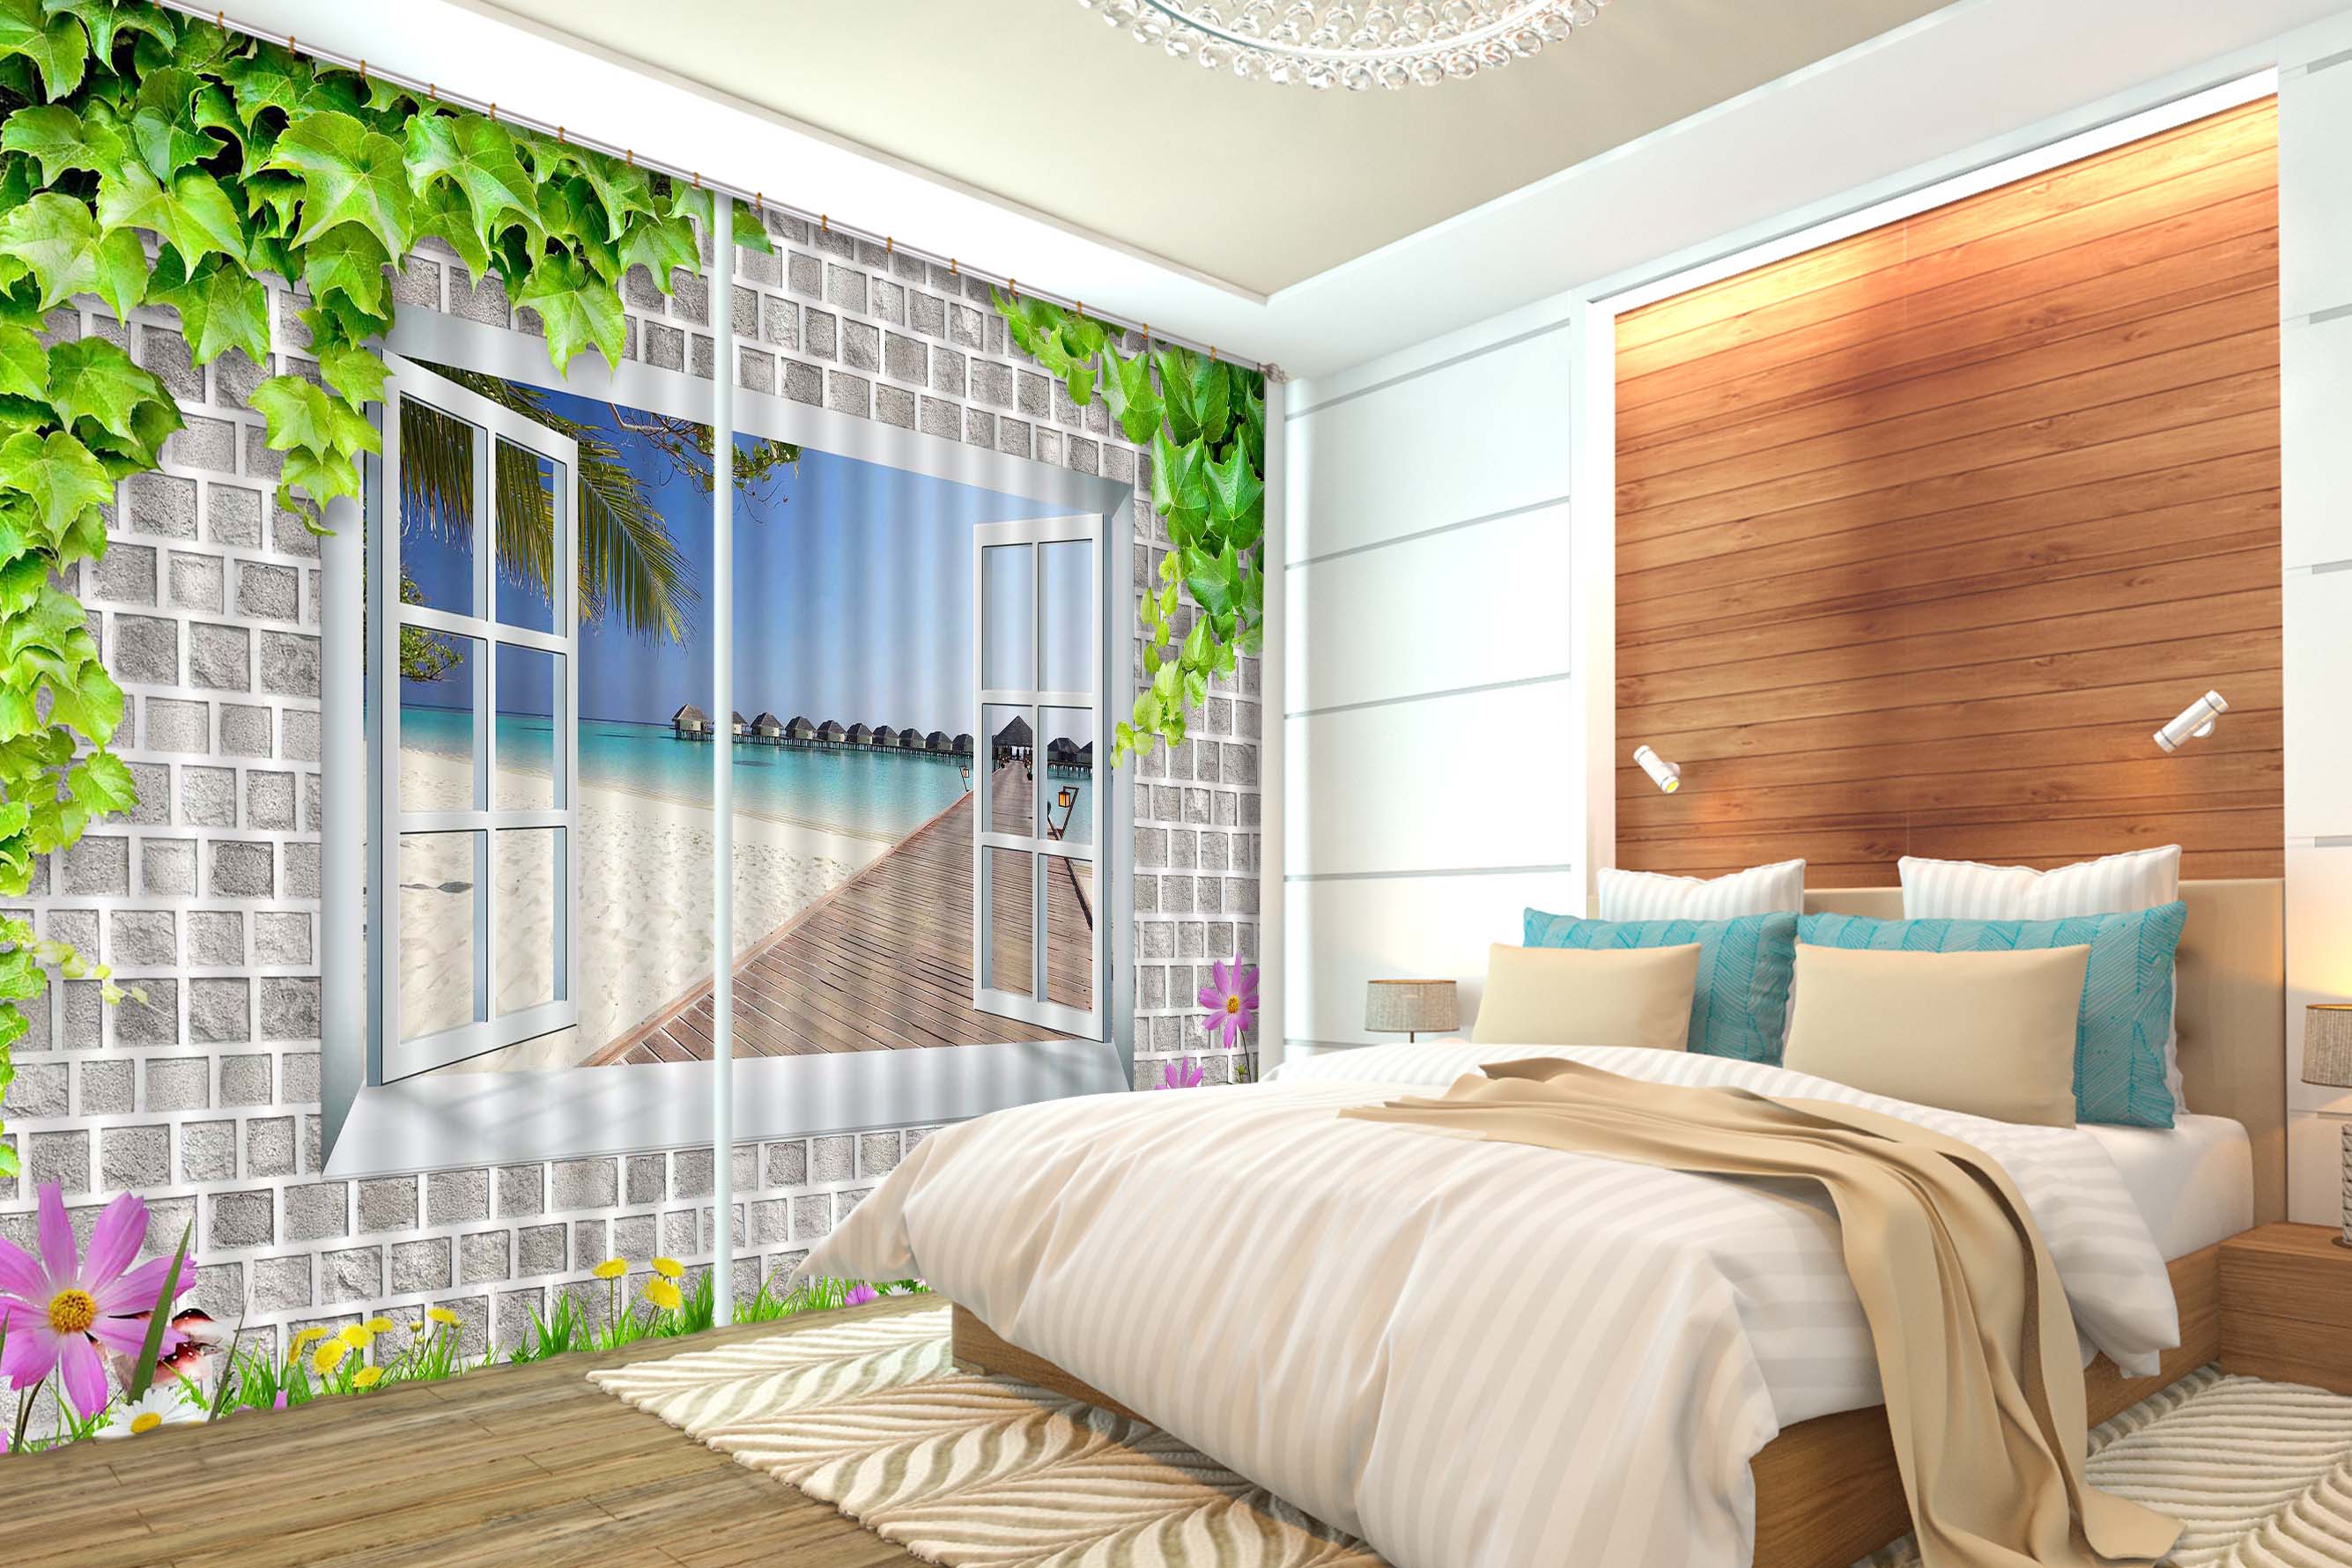 3D Wall Leaves 806 Curtains Drapes